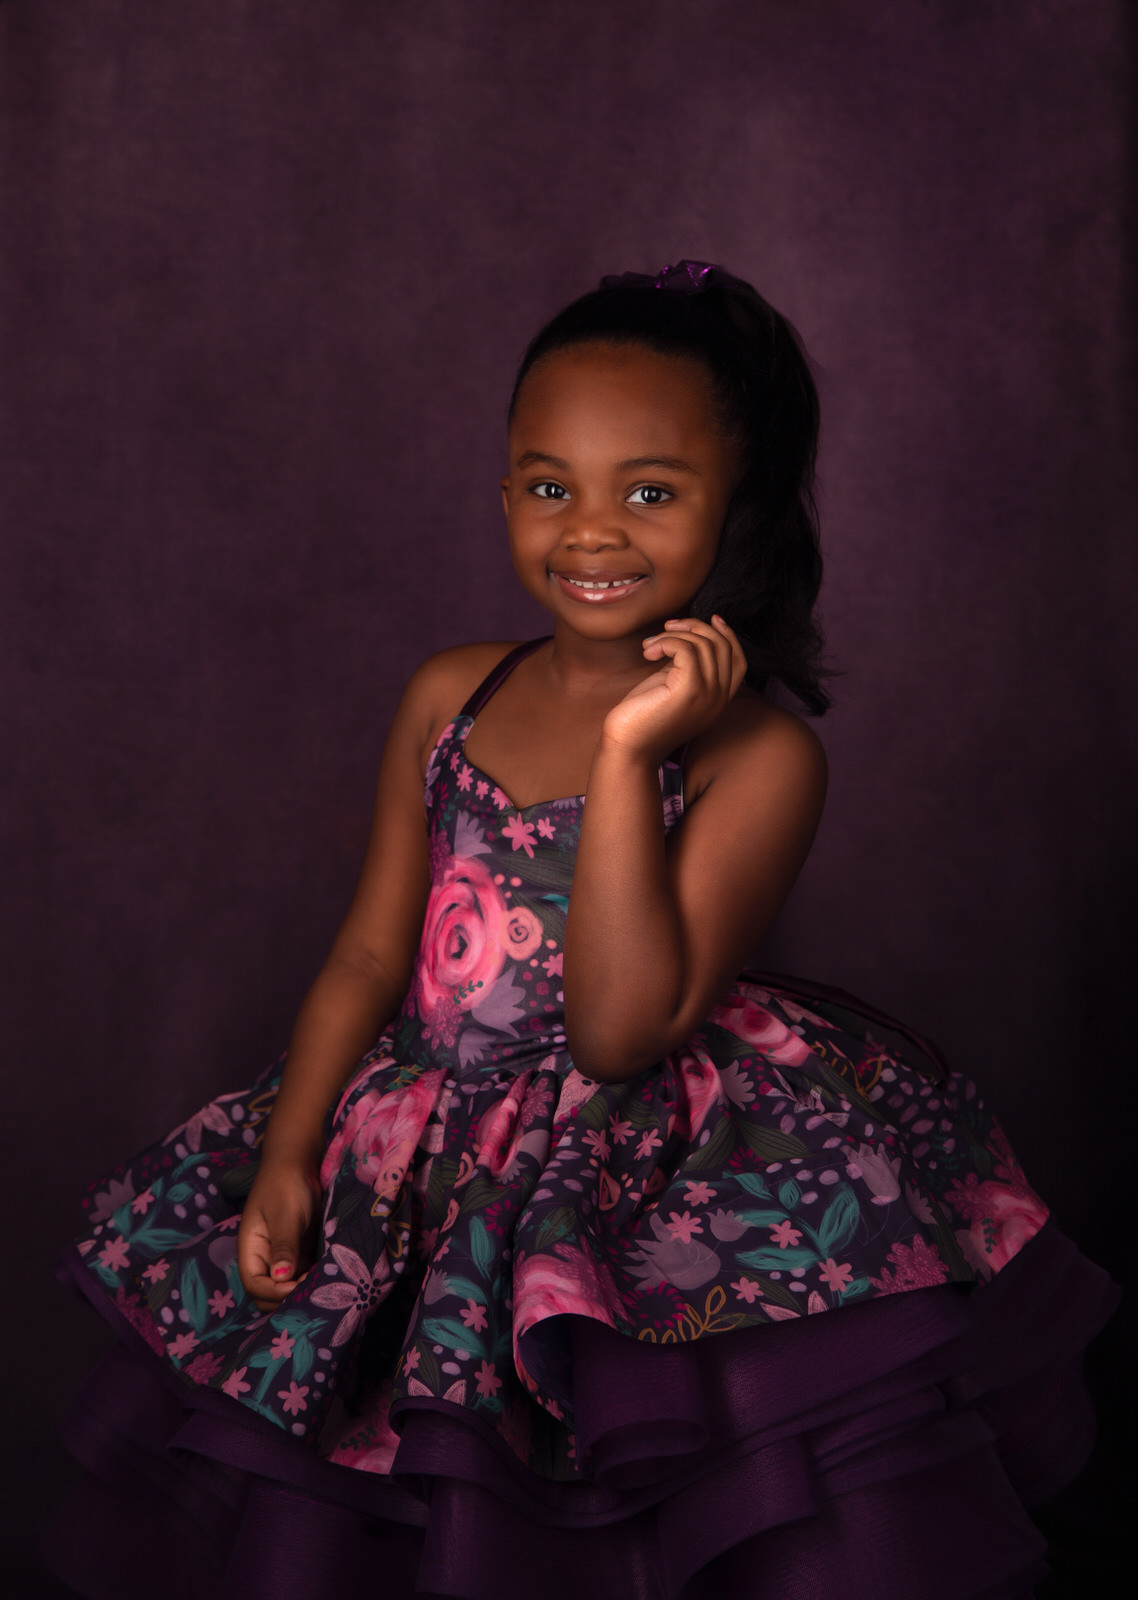 A young girl in a floral dress dances in a studio dallas babysitters